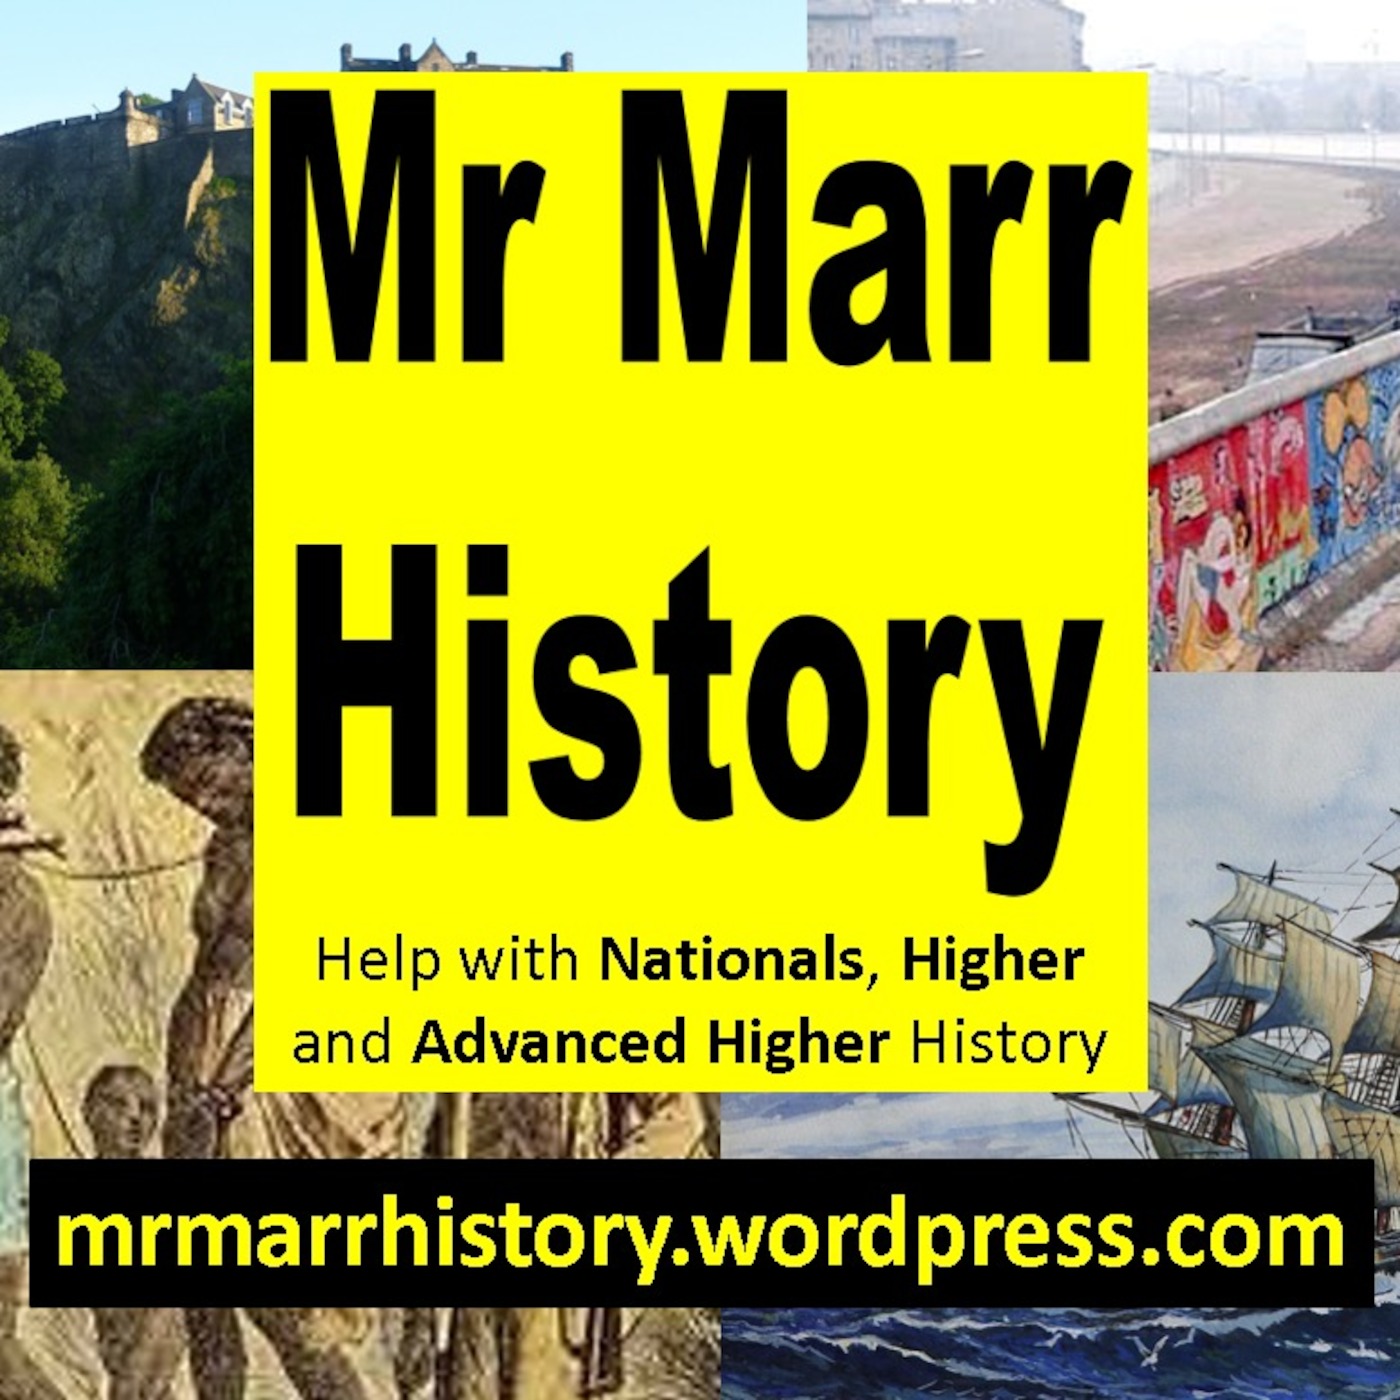 Mr Marr's Advanced Higher History Podcast